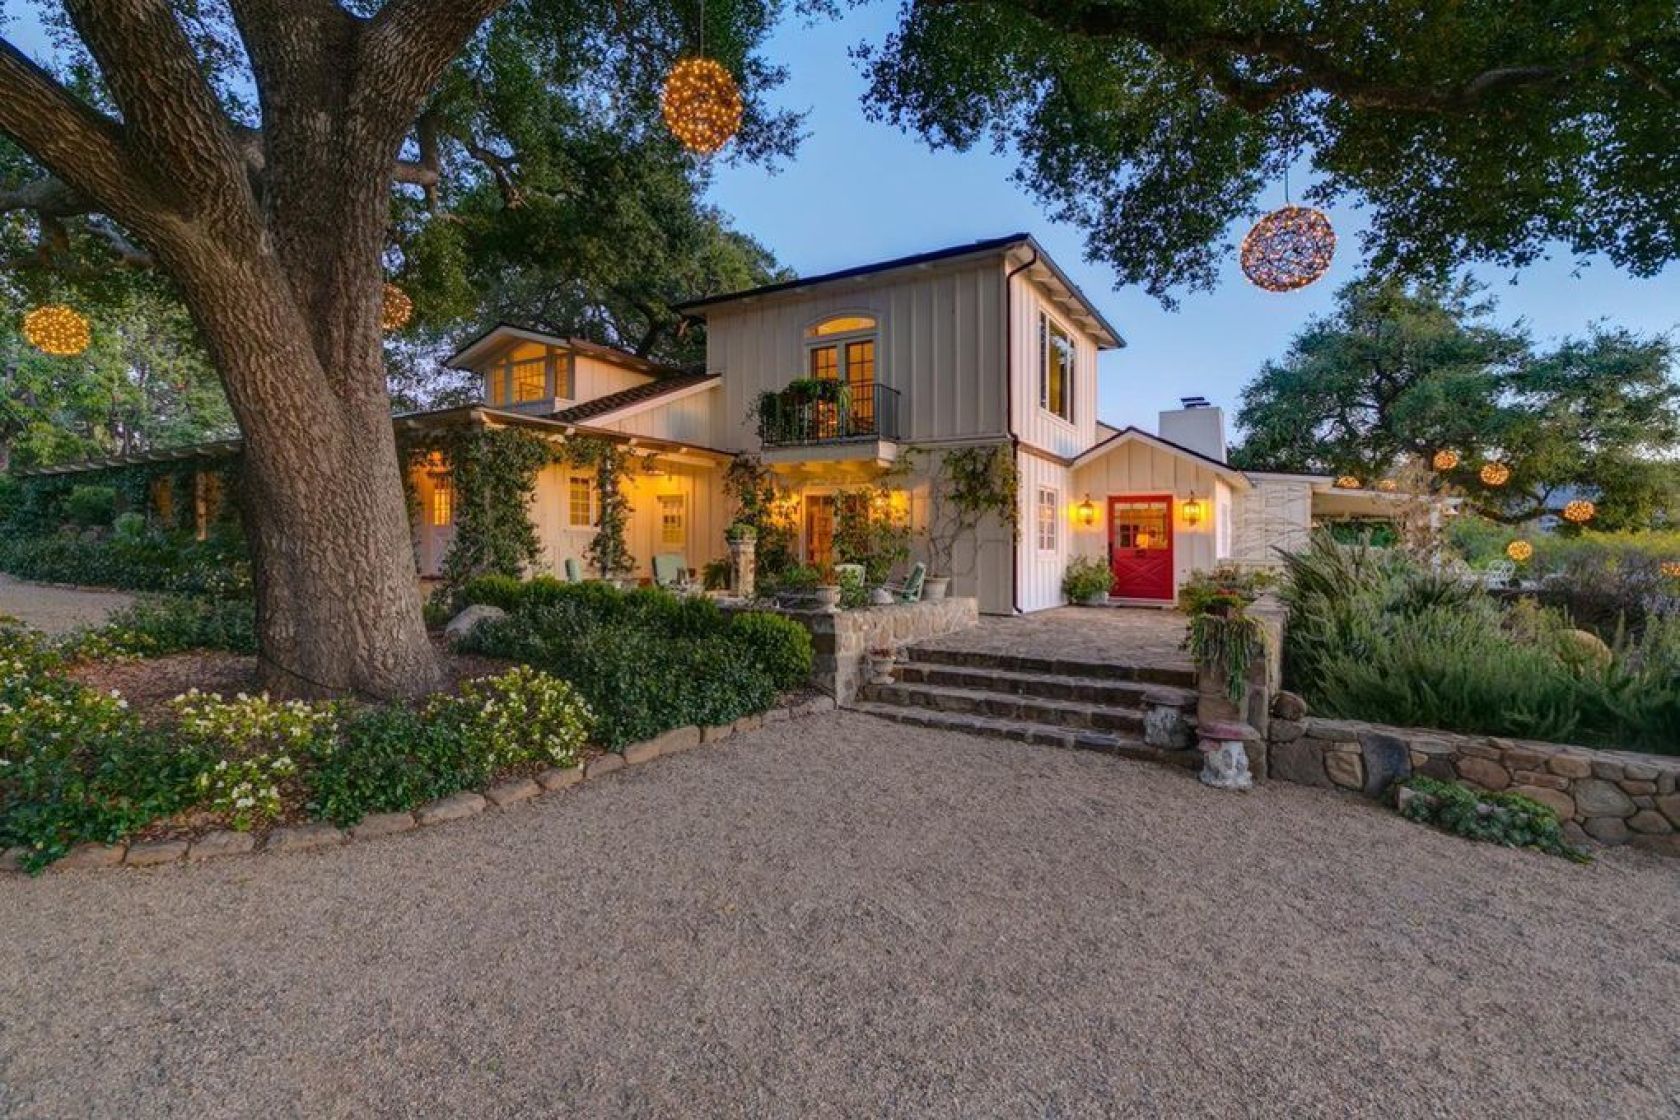 The good Place star sold his Ojai home for $8.75 million